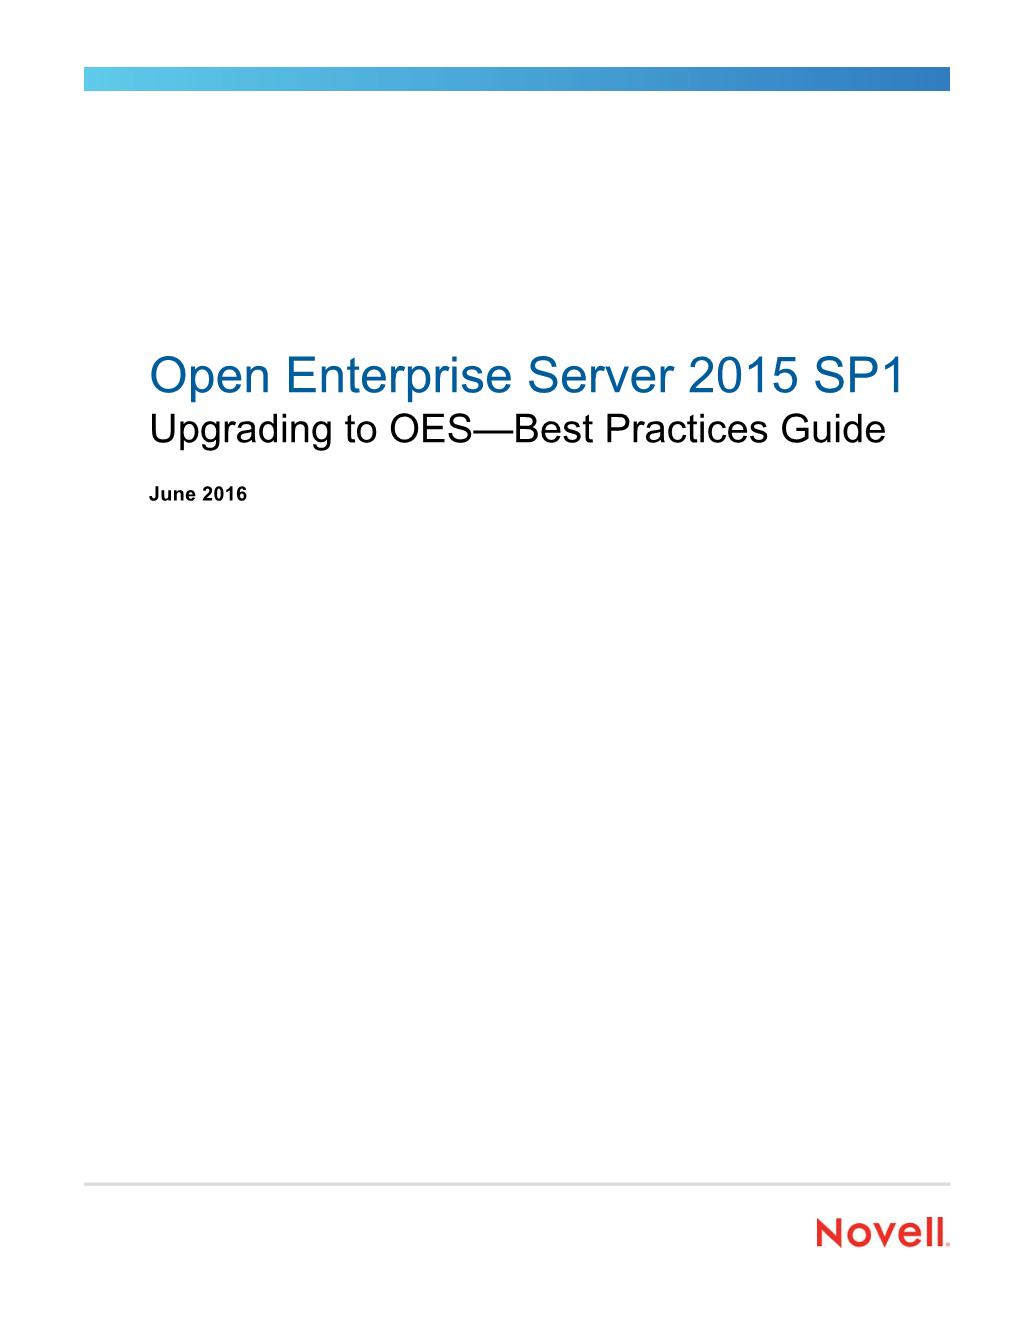 OES 2015 SP1: Upgrading to OES—Best Practices Guide 5.6.3 Netstorage Is Not Transferred